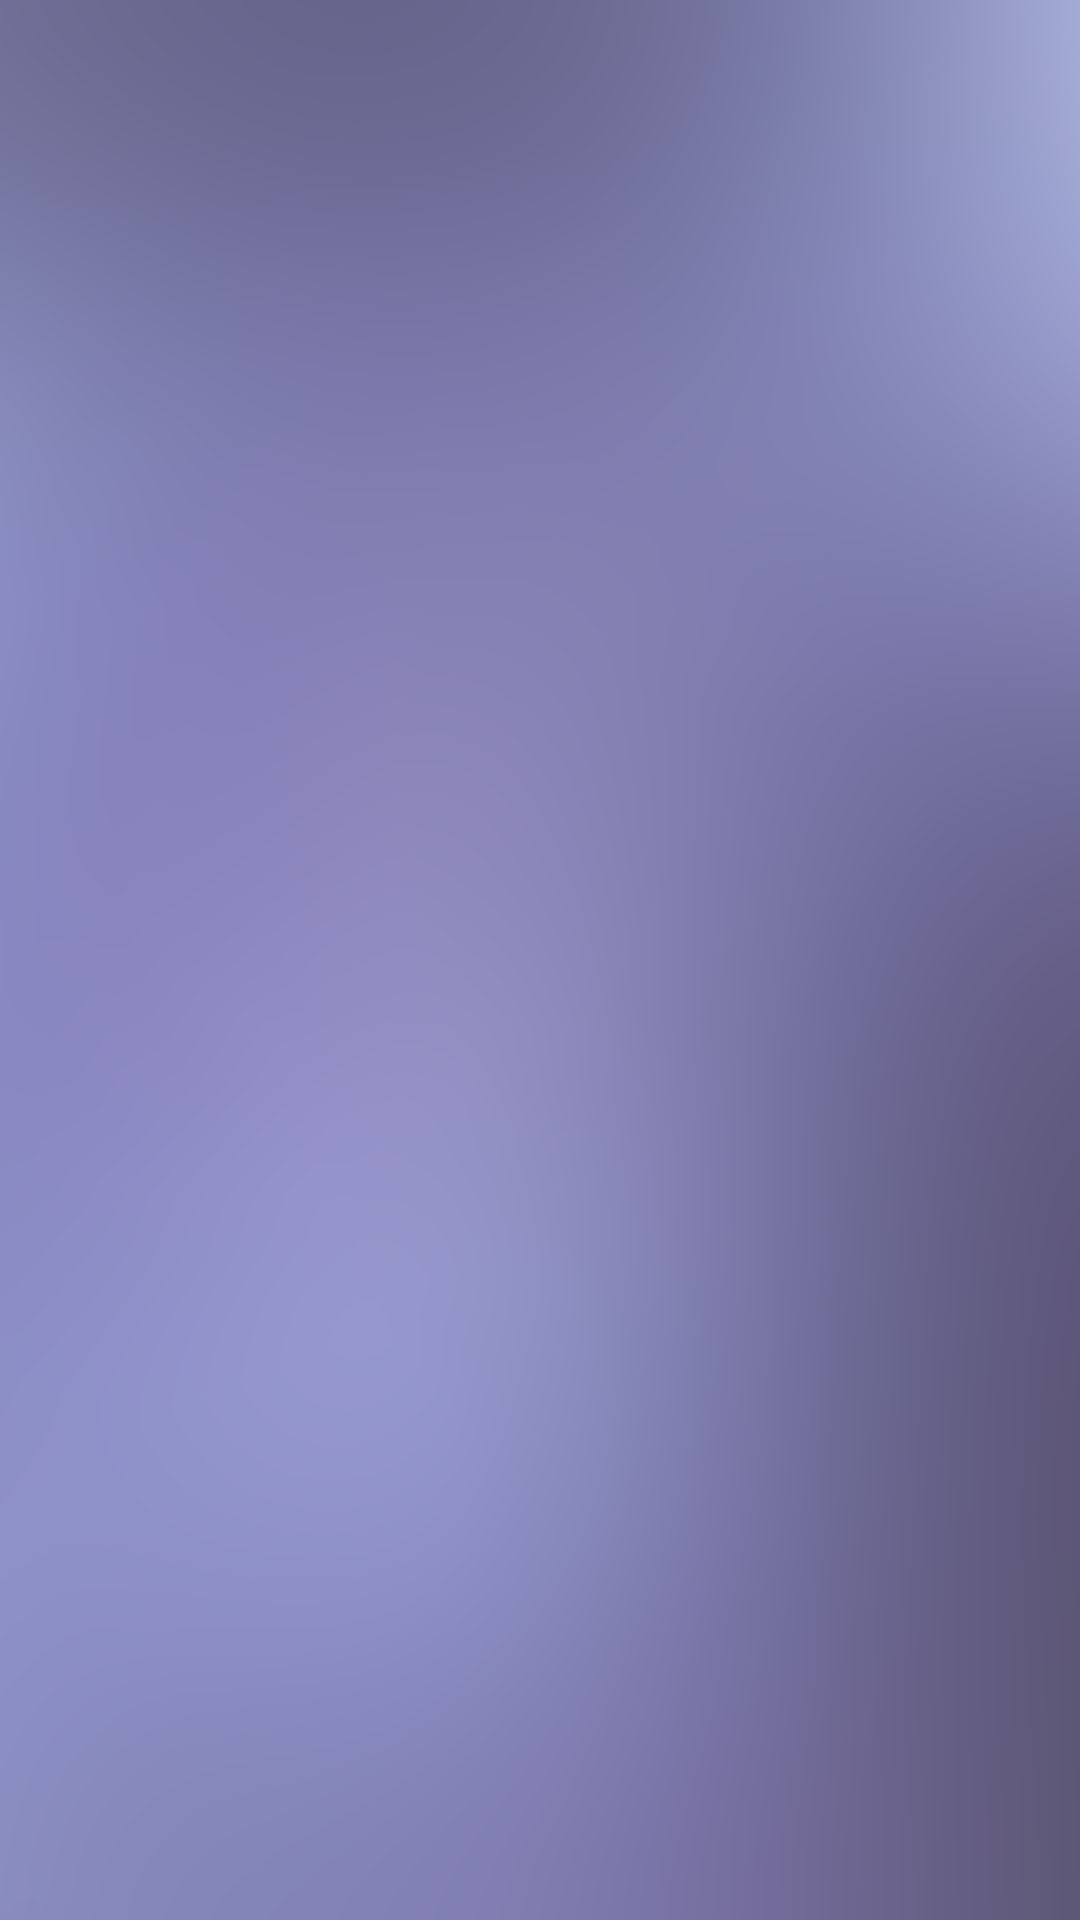 1080x1920 Simple Violet Gradient HTC Android Wallpaper